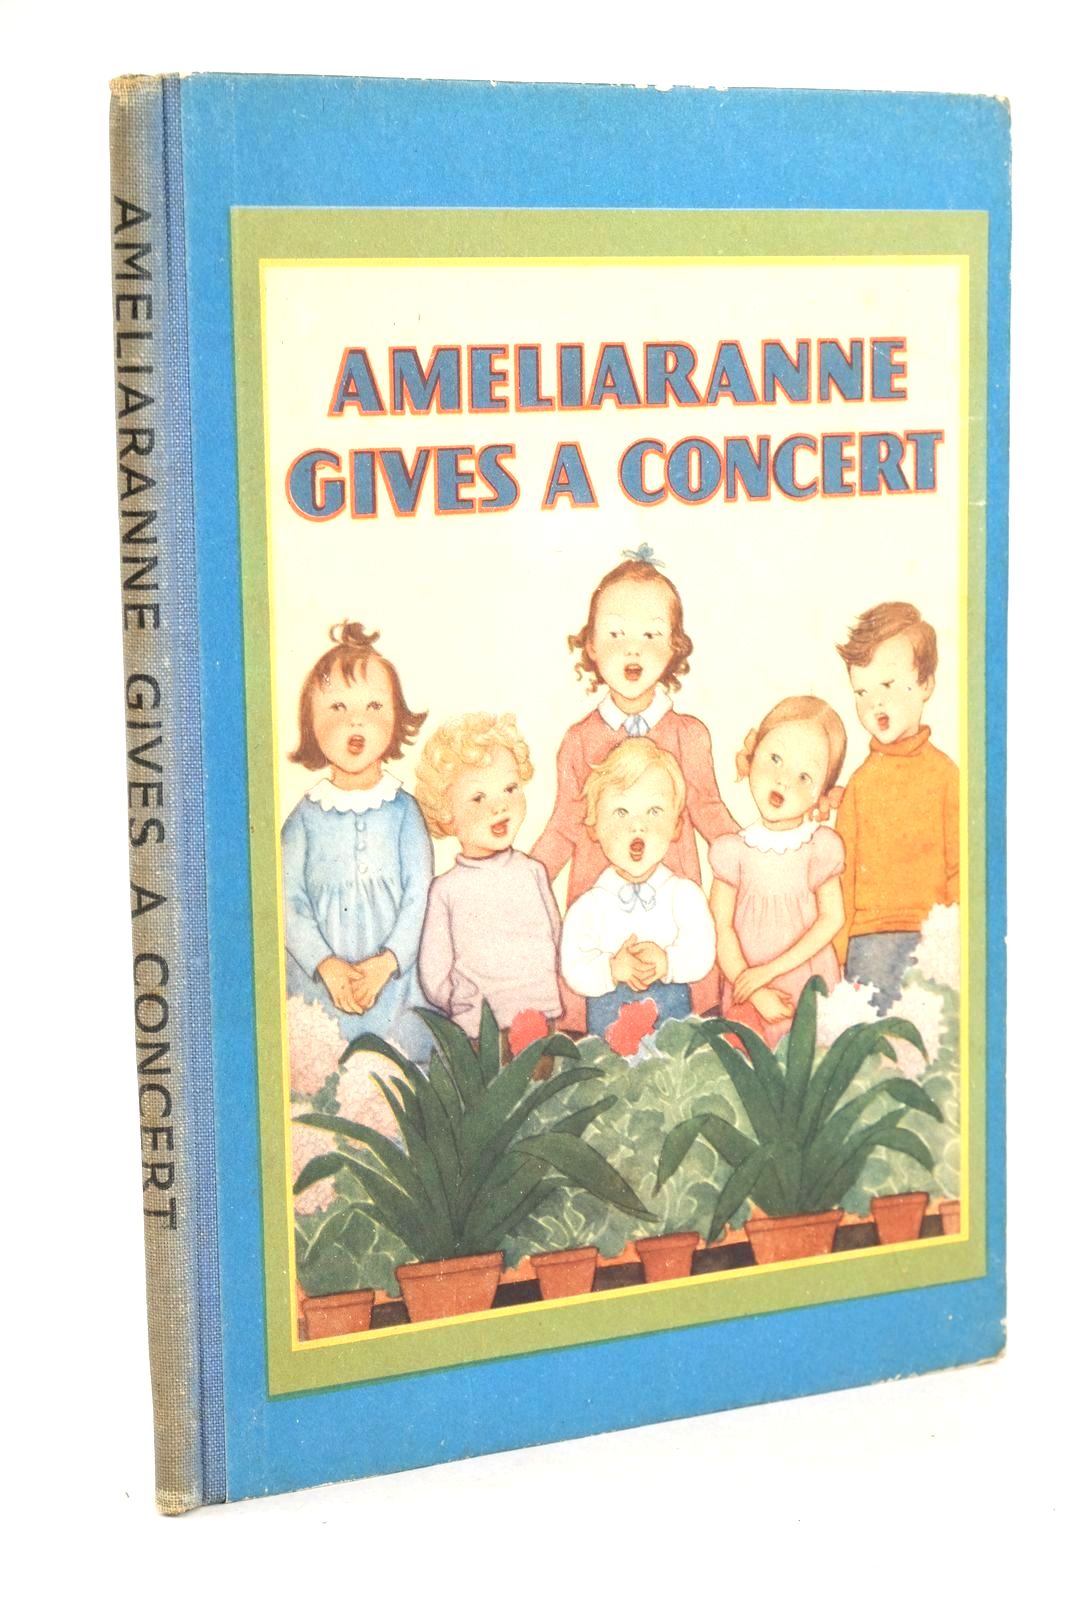 Photo of AMELIARANNE GIVES A CONCERT- Stock Number: 1325730